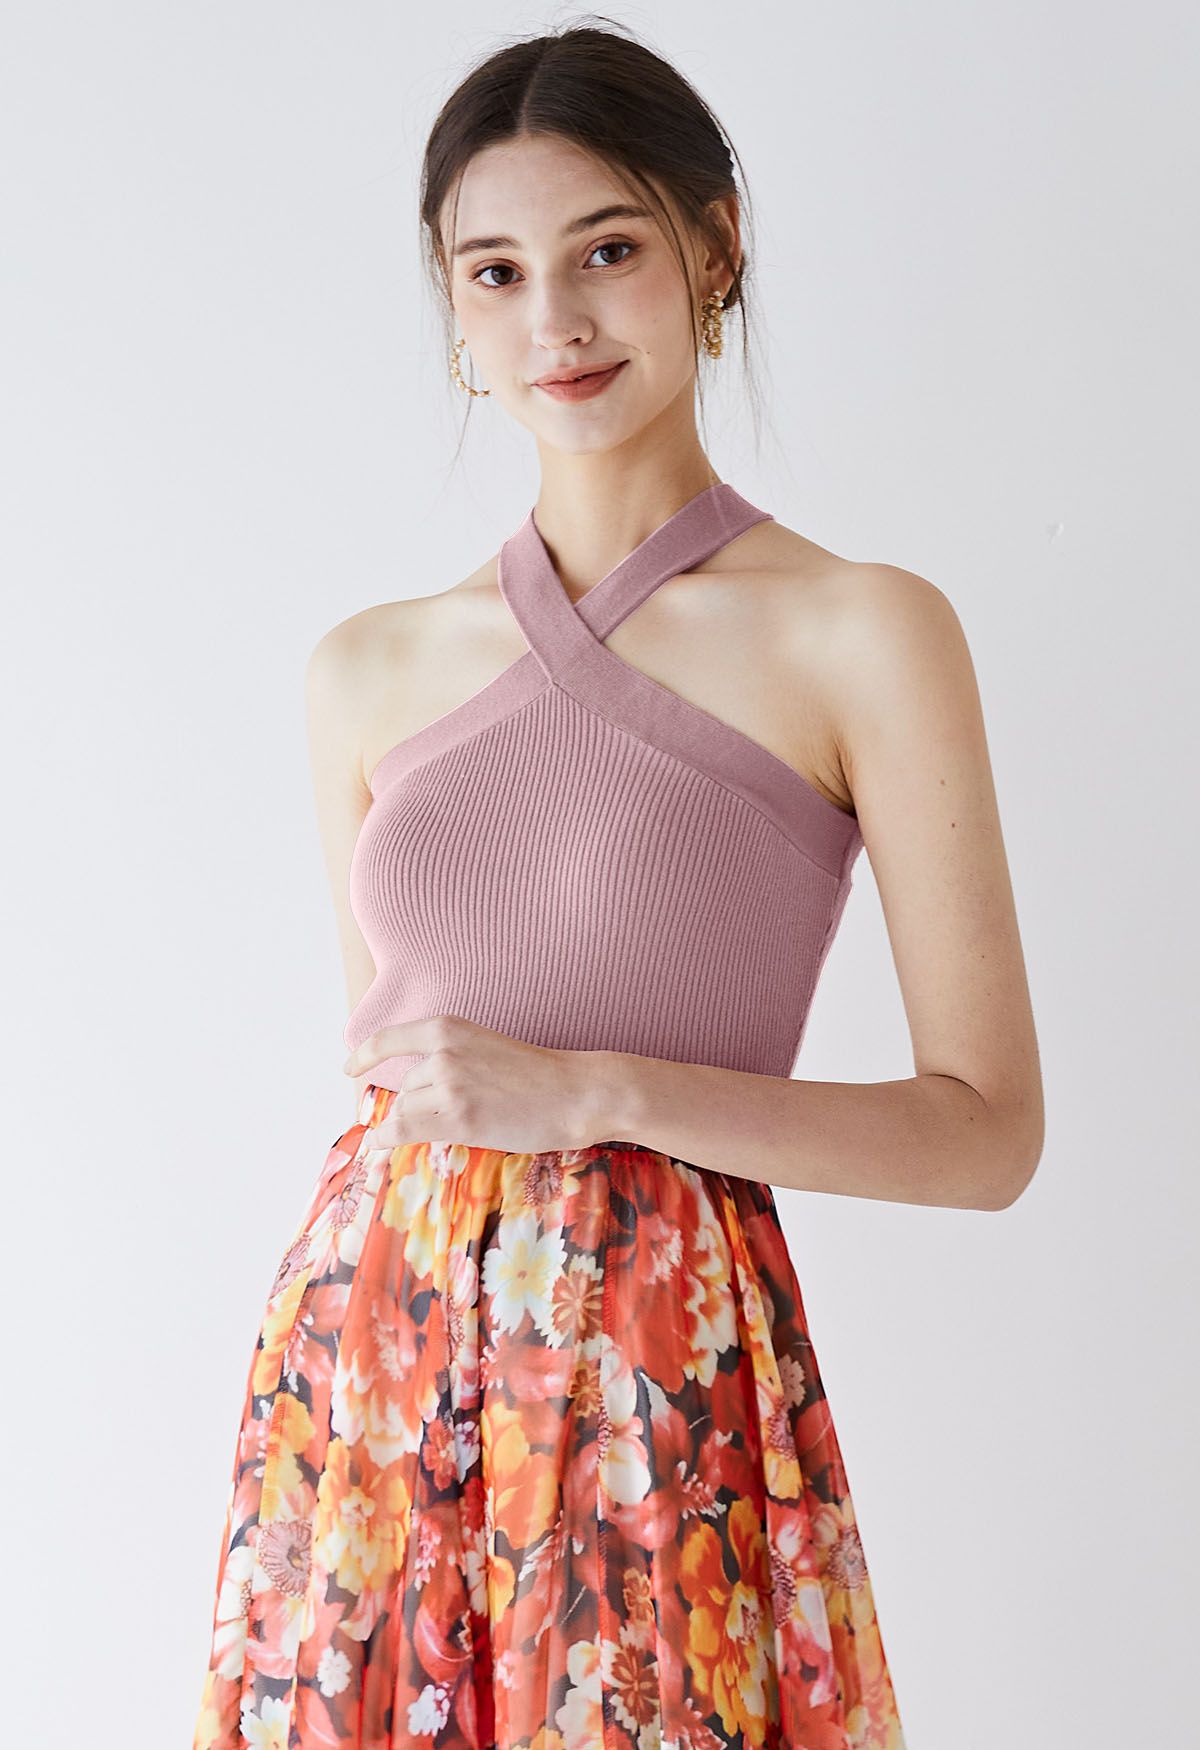 Criss Cross Straps Halter Knit Top in Pink - Retro, Indie and Unique Fashion